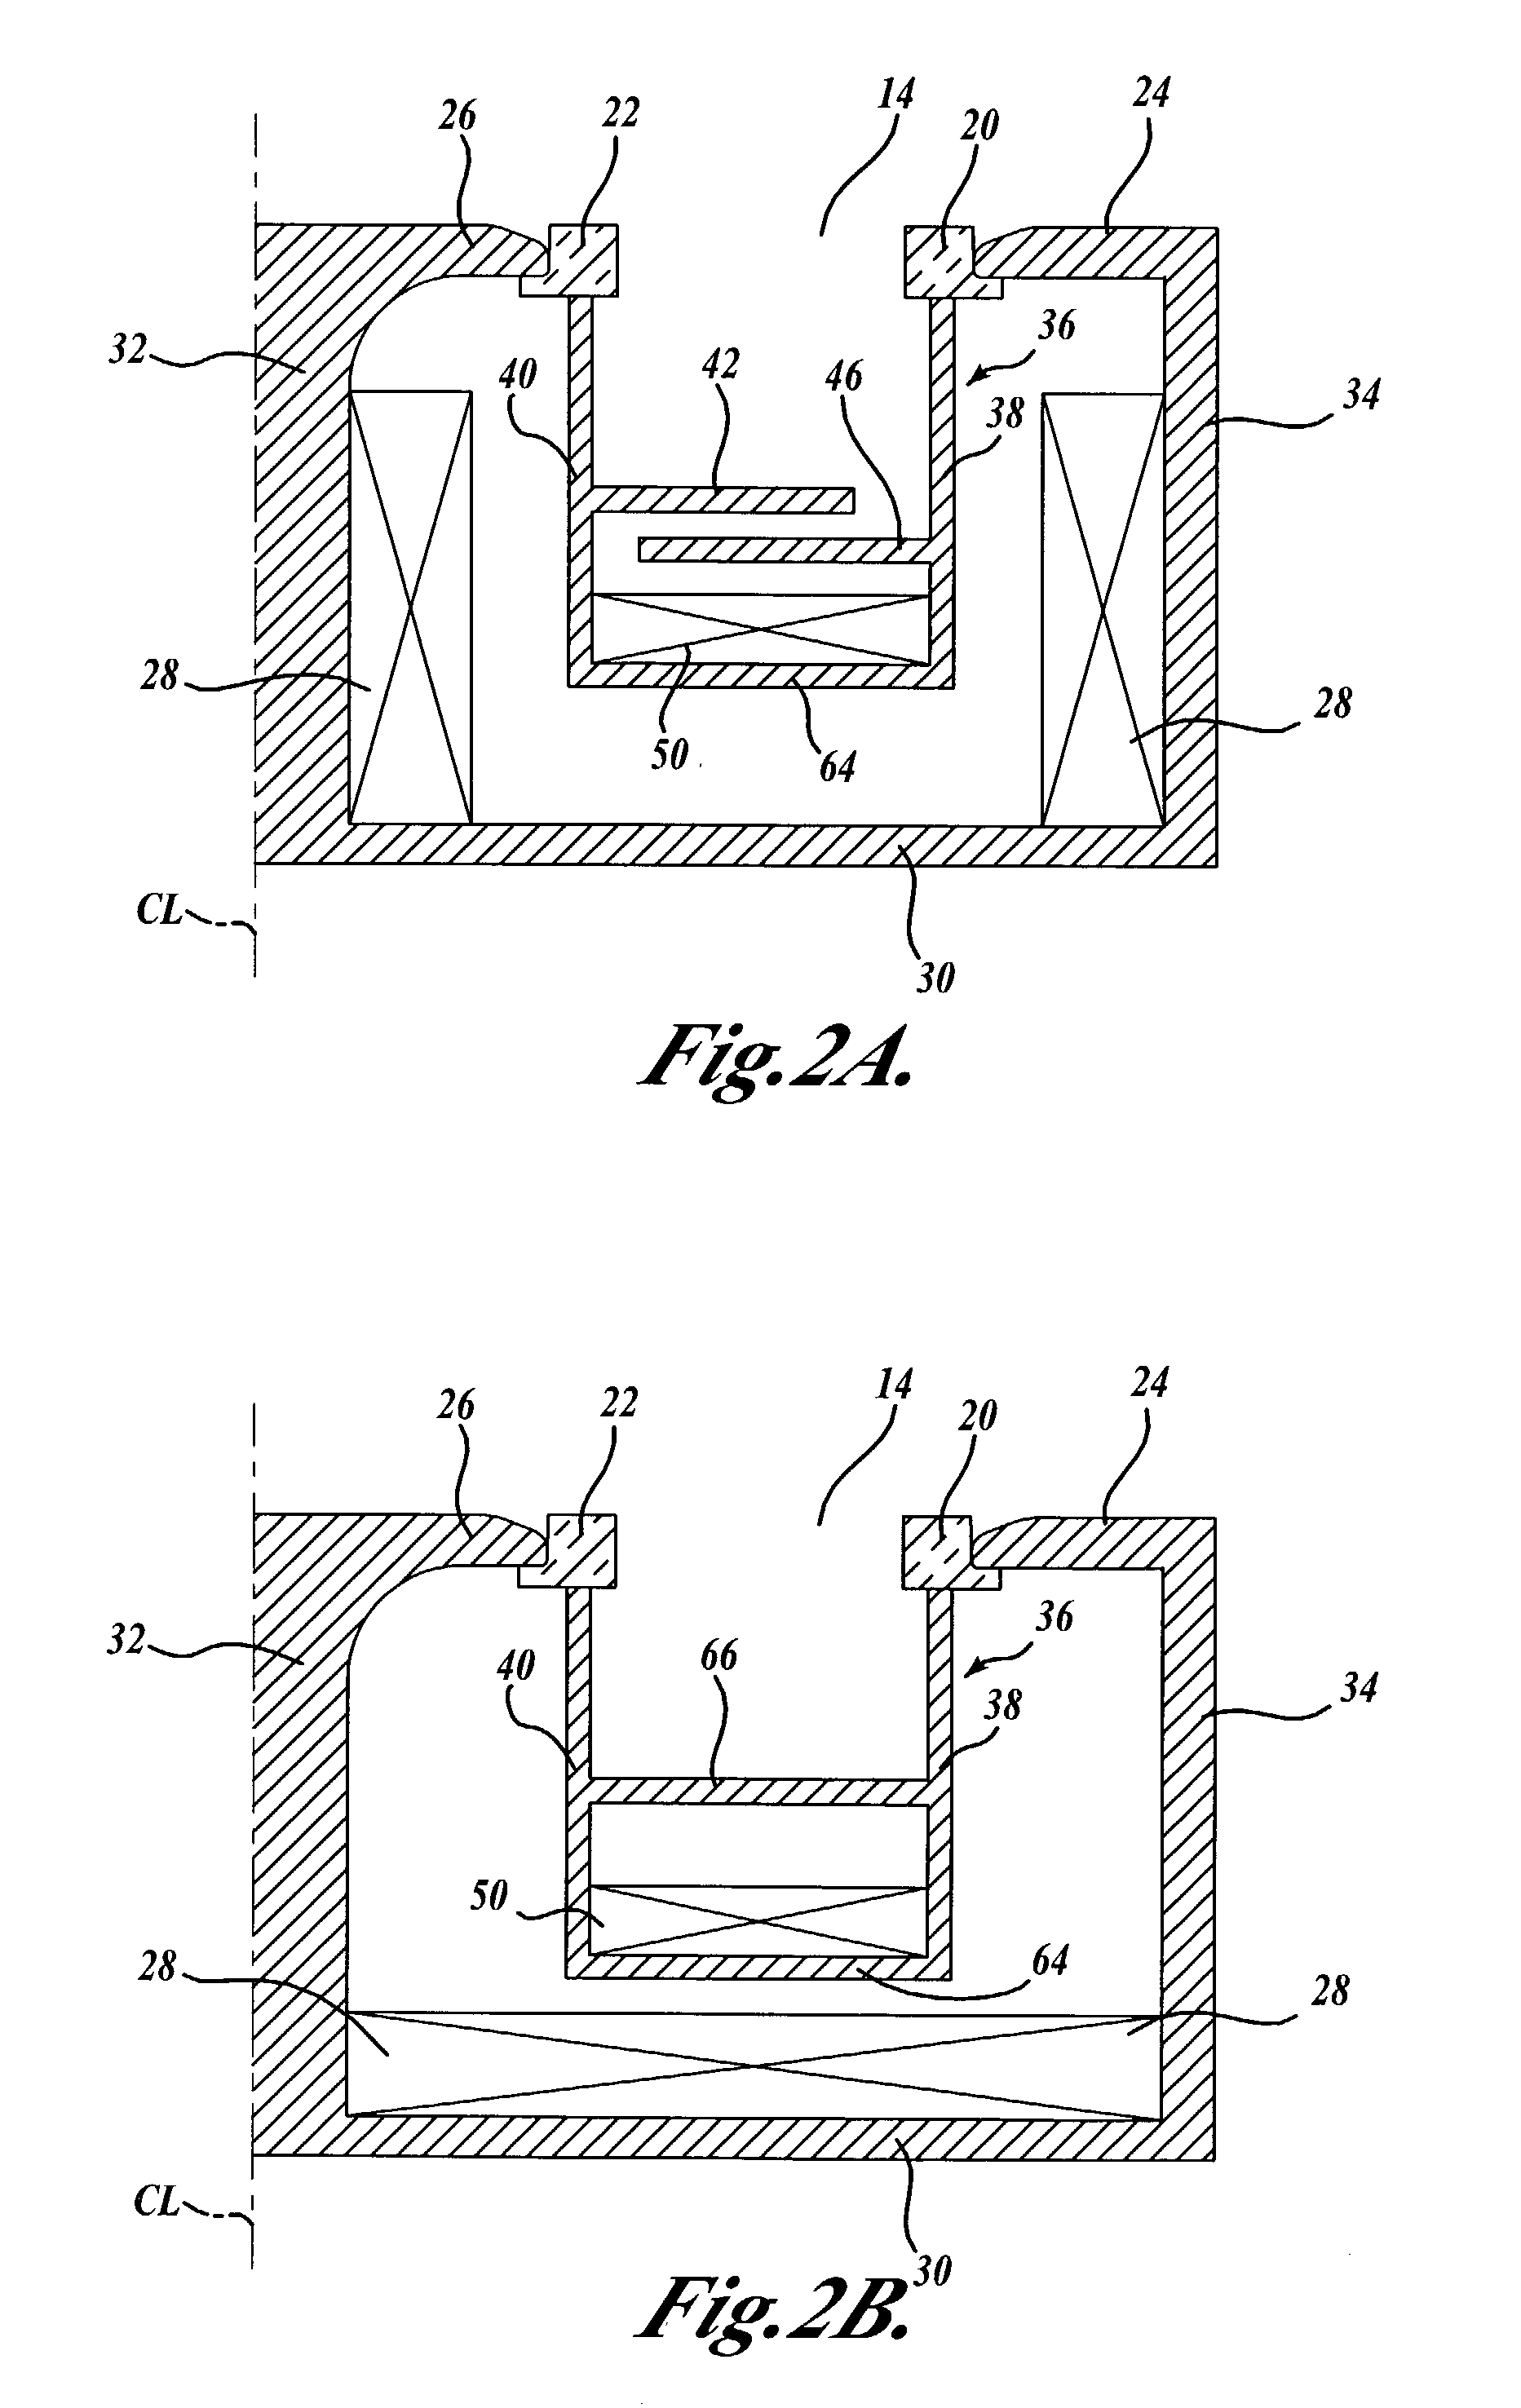 Hall effect thruster with anode having magnetic field barrier